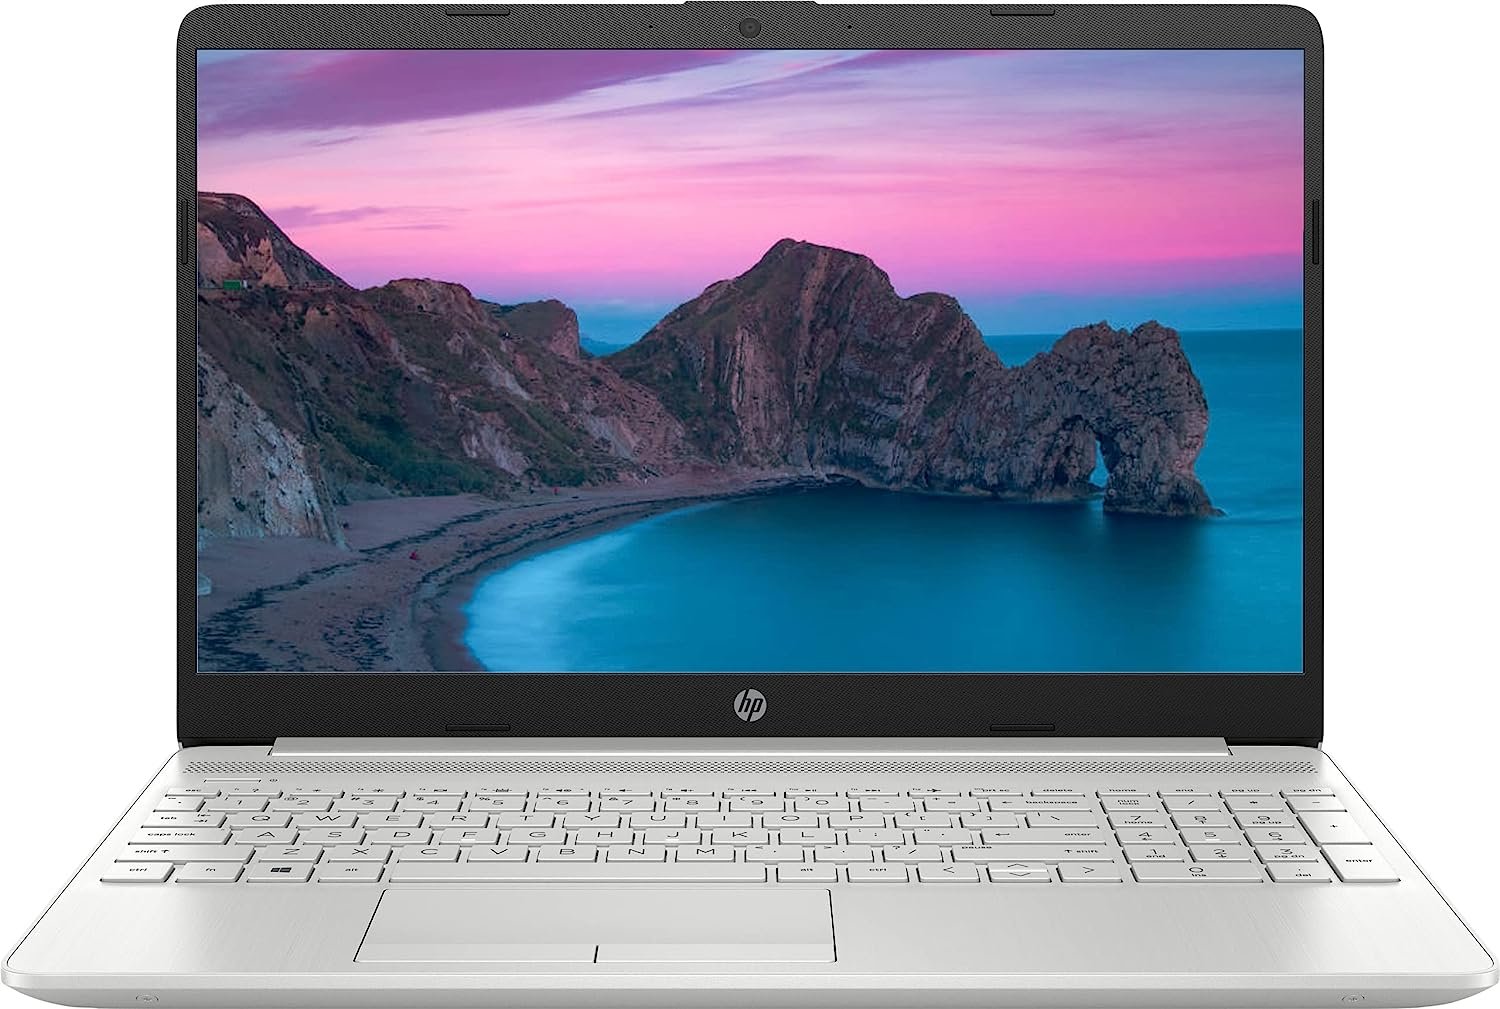 2022 Newest HP Pavilion 15.6 HD Micro-Edge Laptop for Student and Home use